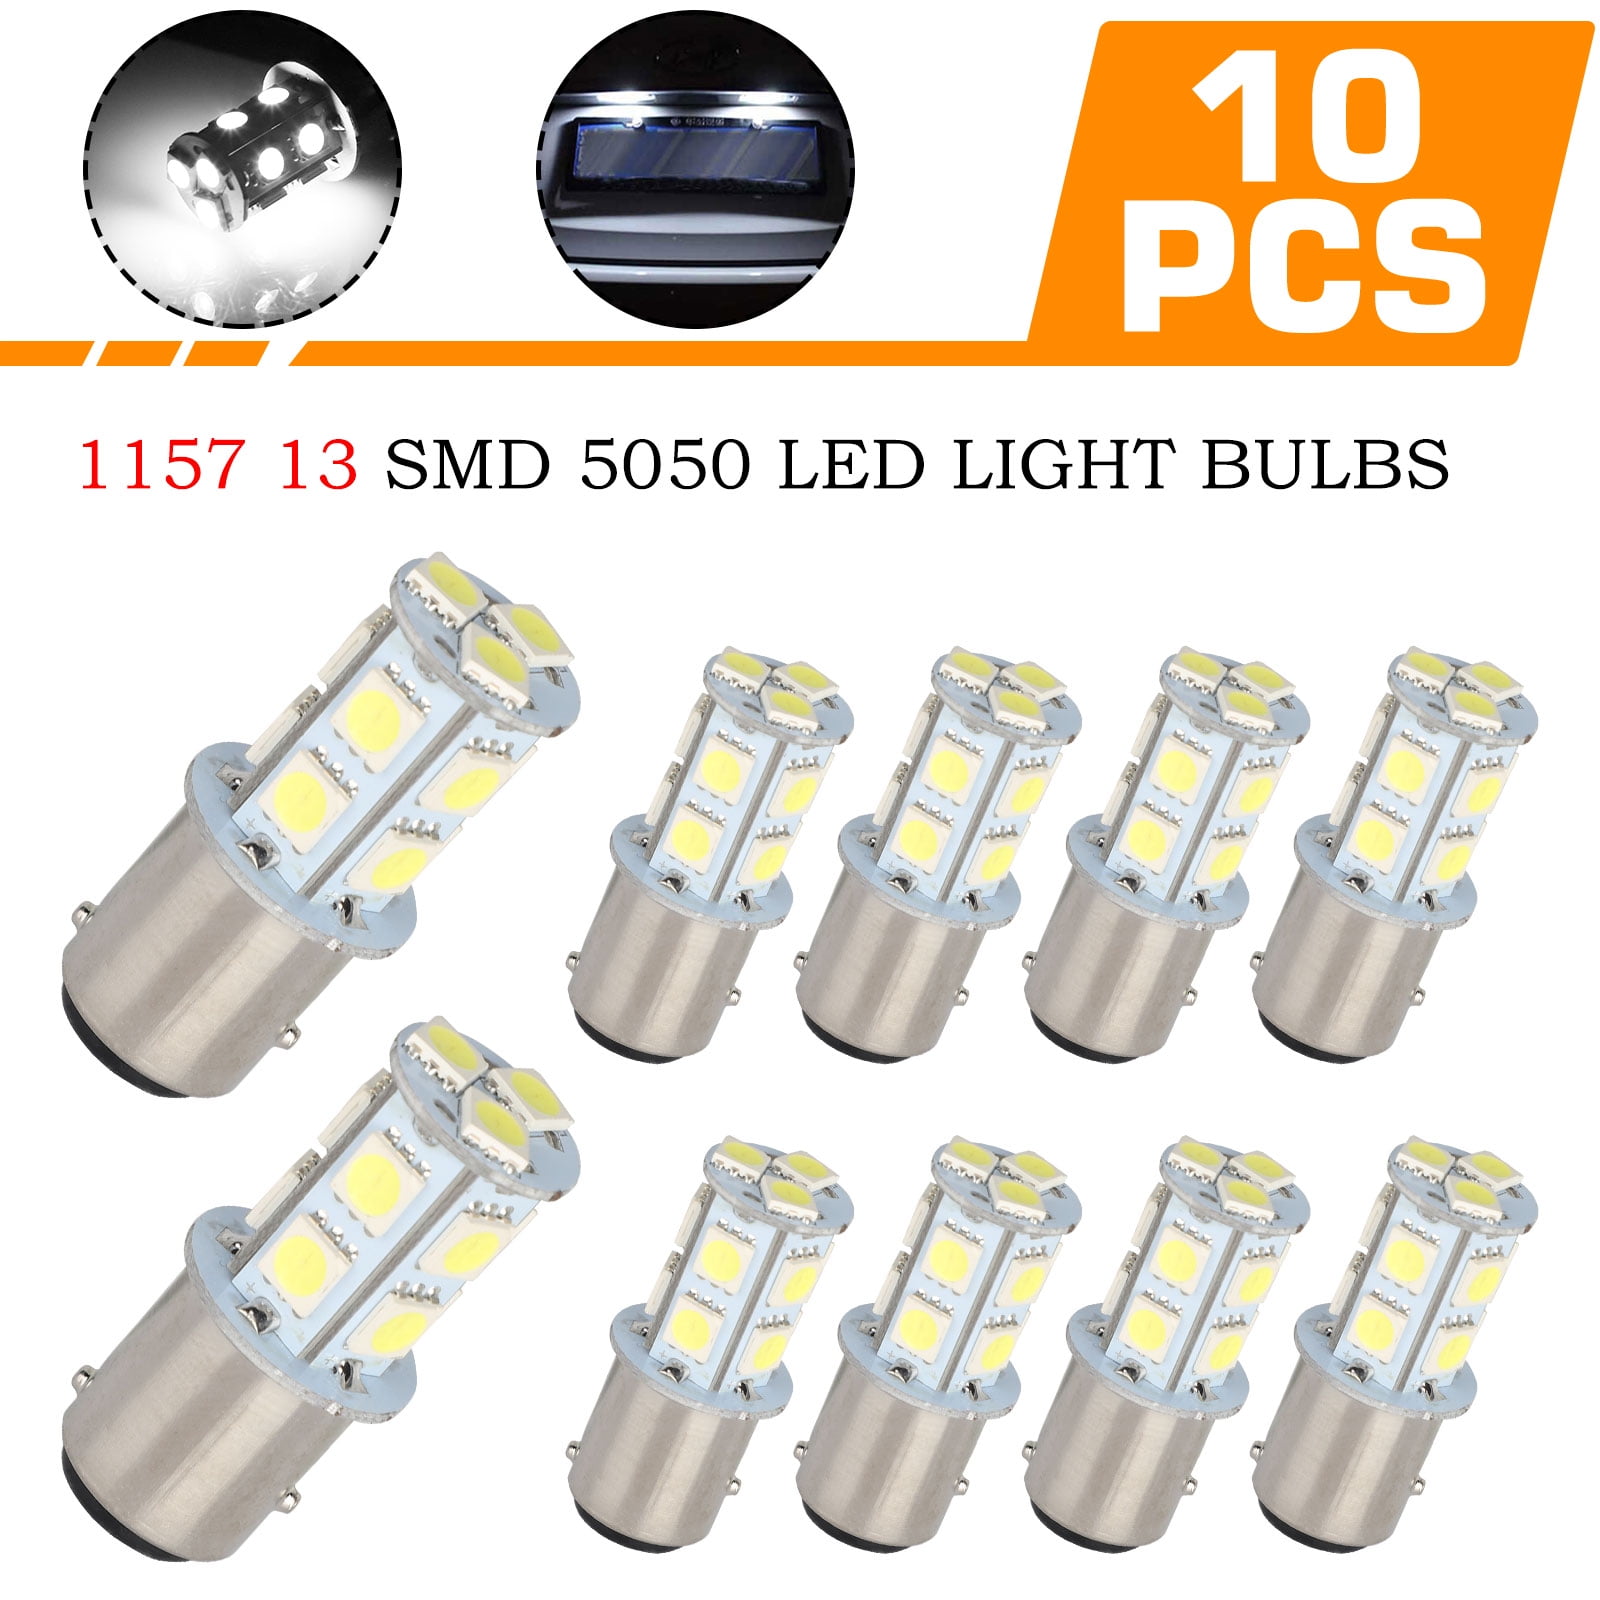 1157 LED Bulbs Parking Lights Pack of 2 Brilliant Red Turn Signal Lights LIGHSTA Super Bright 24-SMD 9-30V 2057 2357 7528 1157A BAY15D LED Bulbs with Projector for Brake Tail Lights 